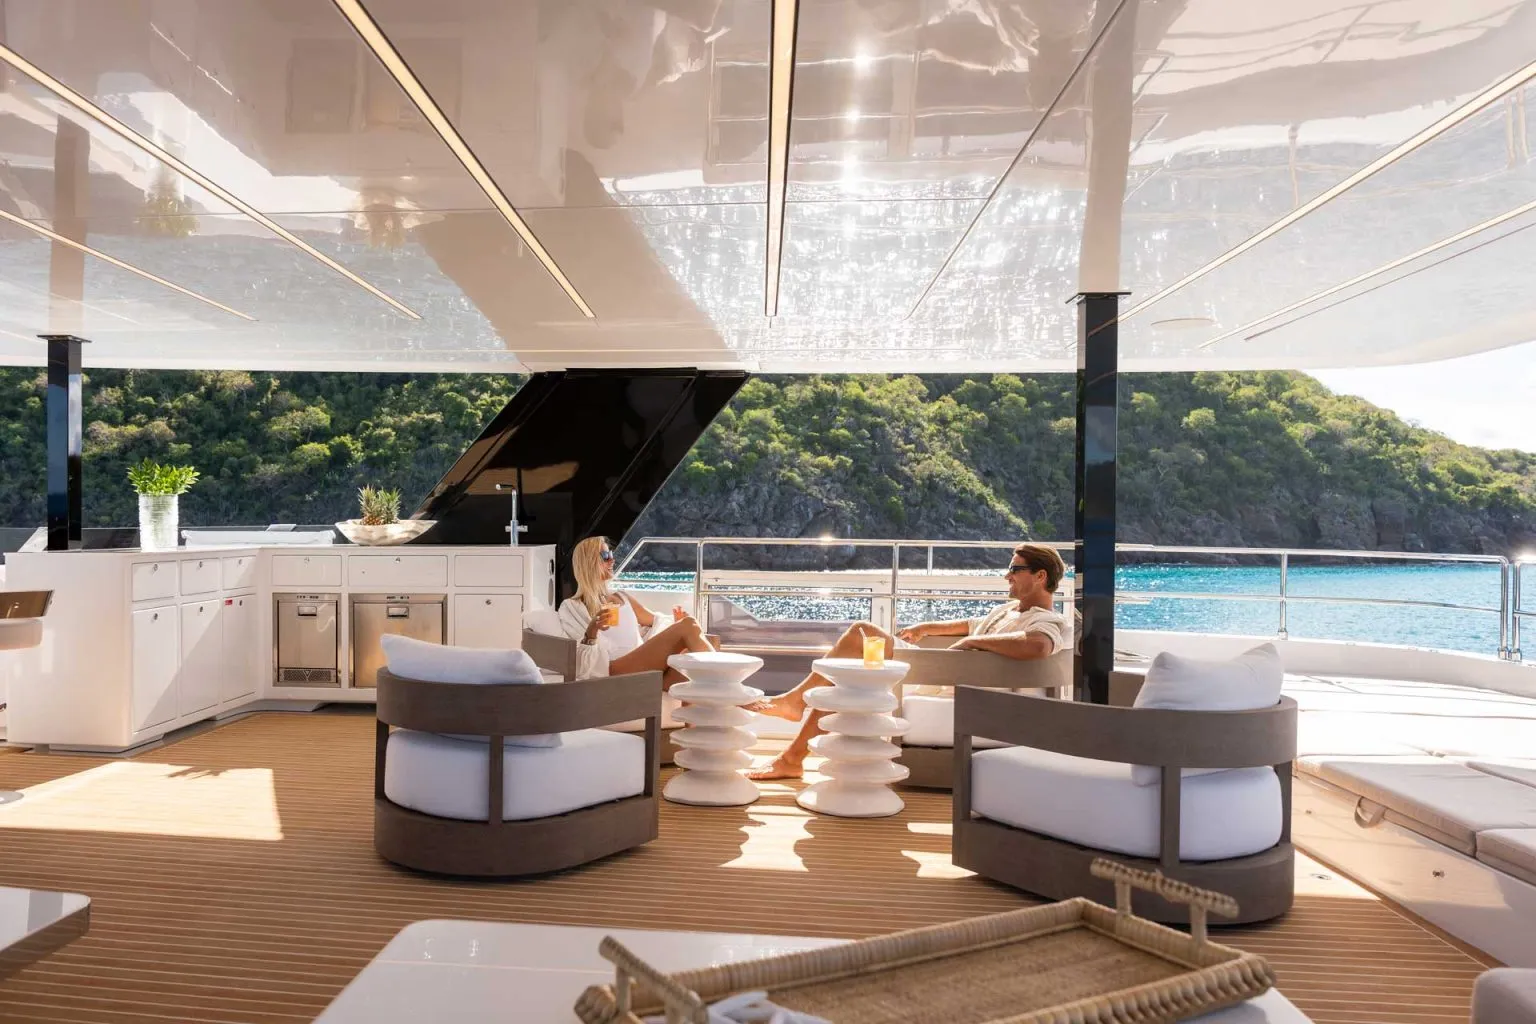 Sunreef Yachts Eco's 80 Sunreef Power Eco wins Best Motor Yacht below 25m at the 2024 International Yacht & Aviation Awards, praised for its innovative solar power system and luxury.